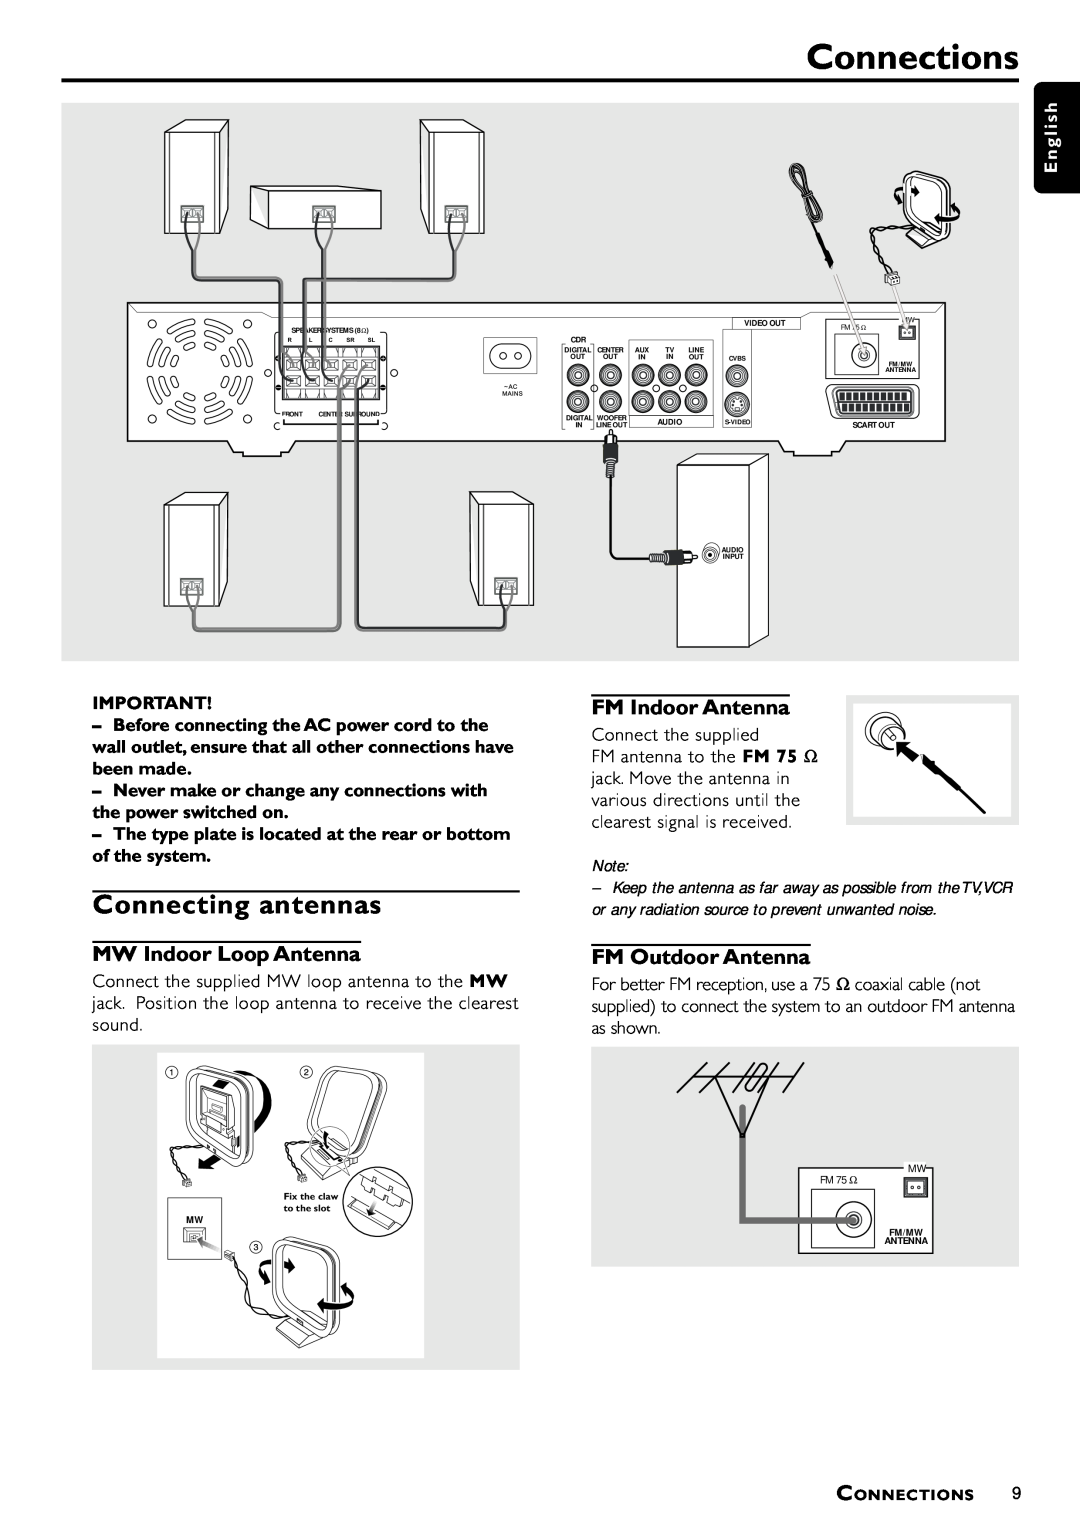 Philips LX8000SA manual Connections, MW Indoor Loop Antenna, FM Indoor Antenna, FM Outdoor Antenna, English 